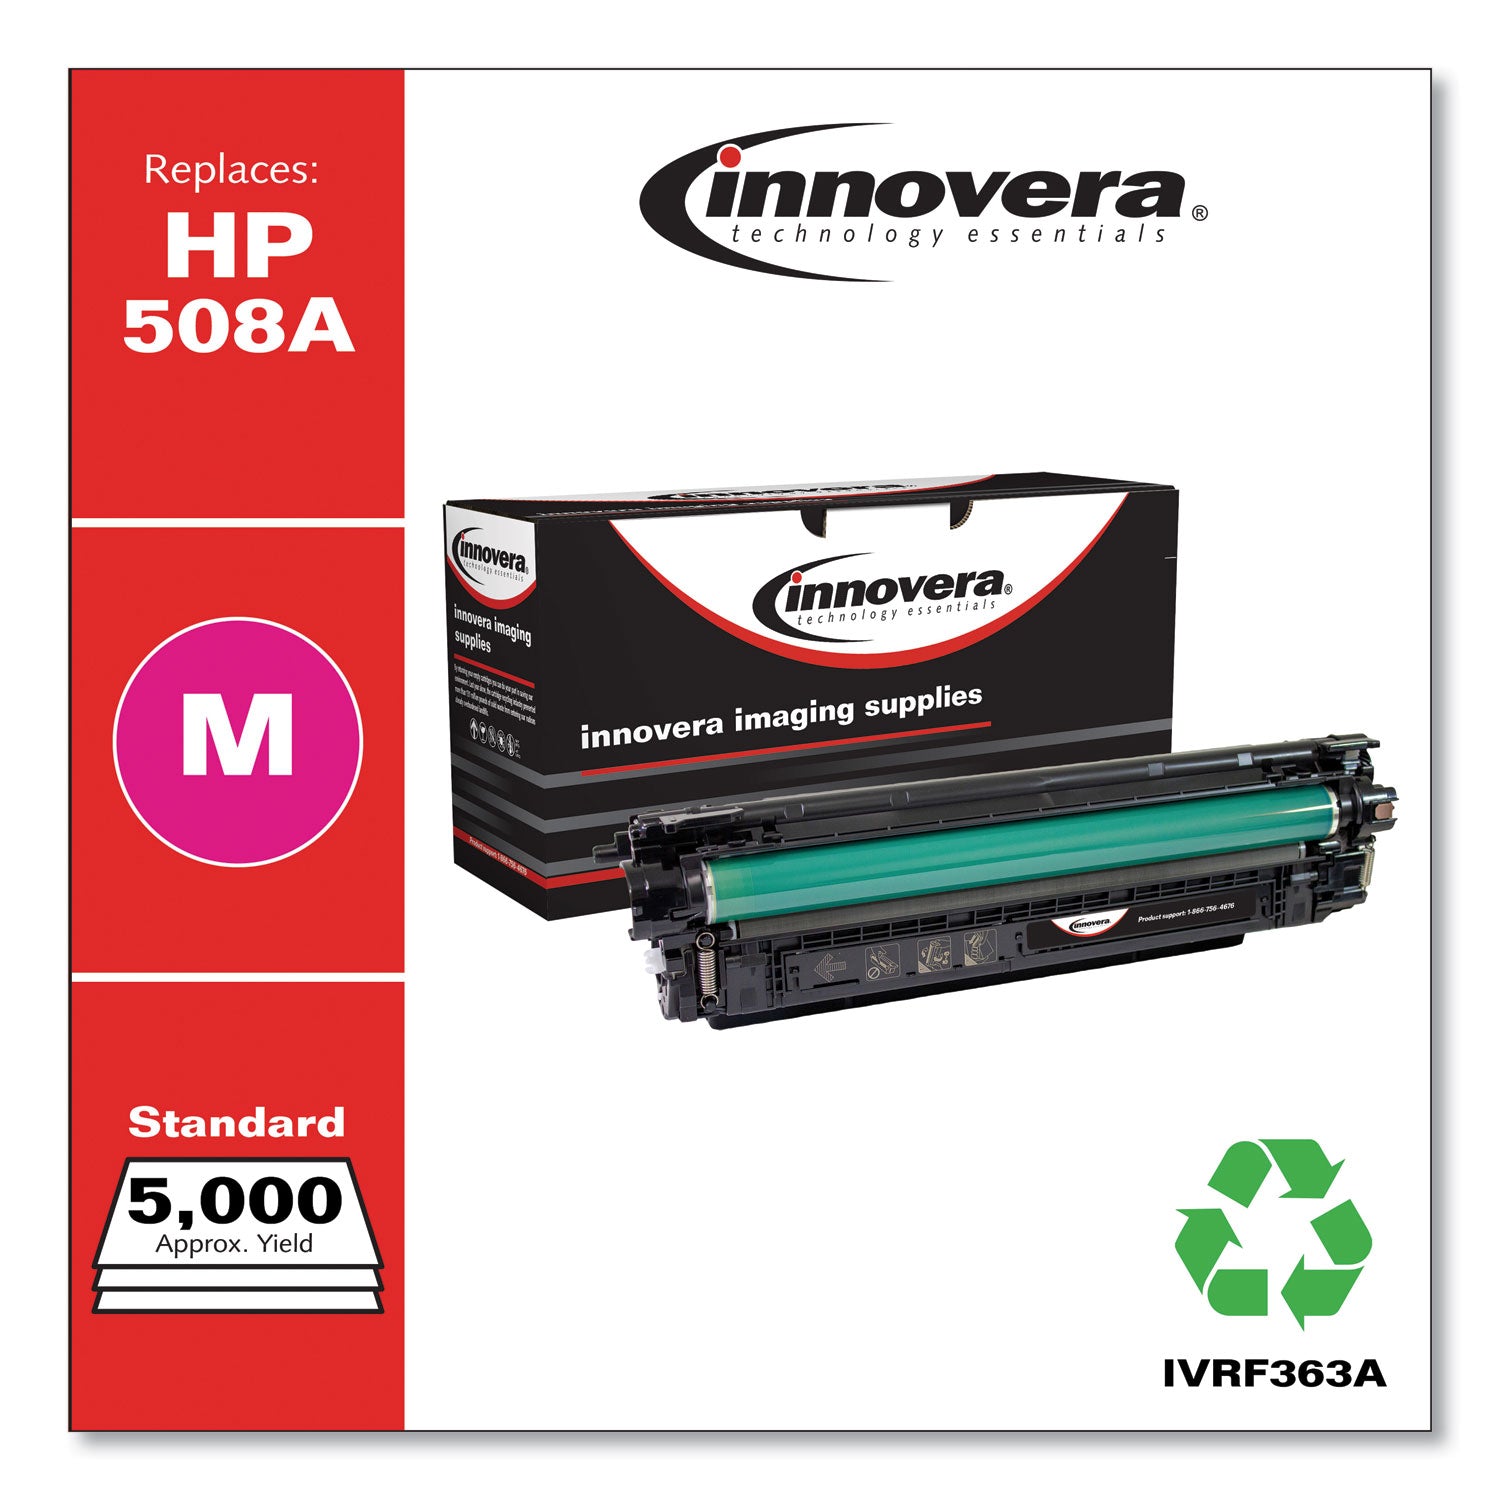 remanufactured-magenta-toner-replacement-for-508a-cf363a-5000-page-yield_ivrf363a - 2